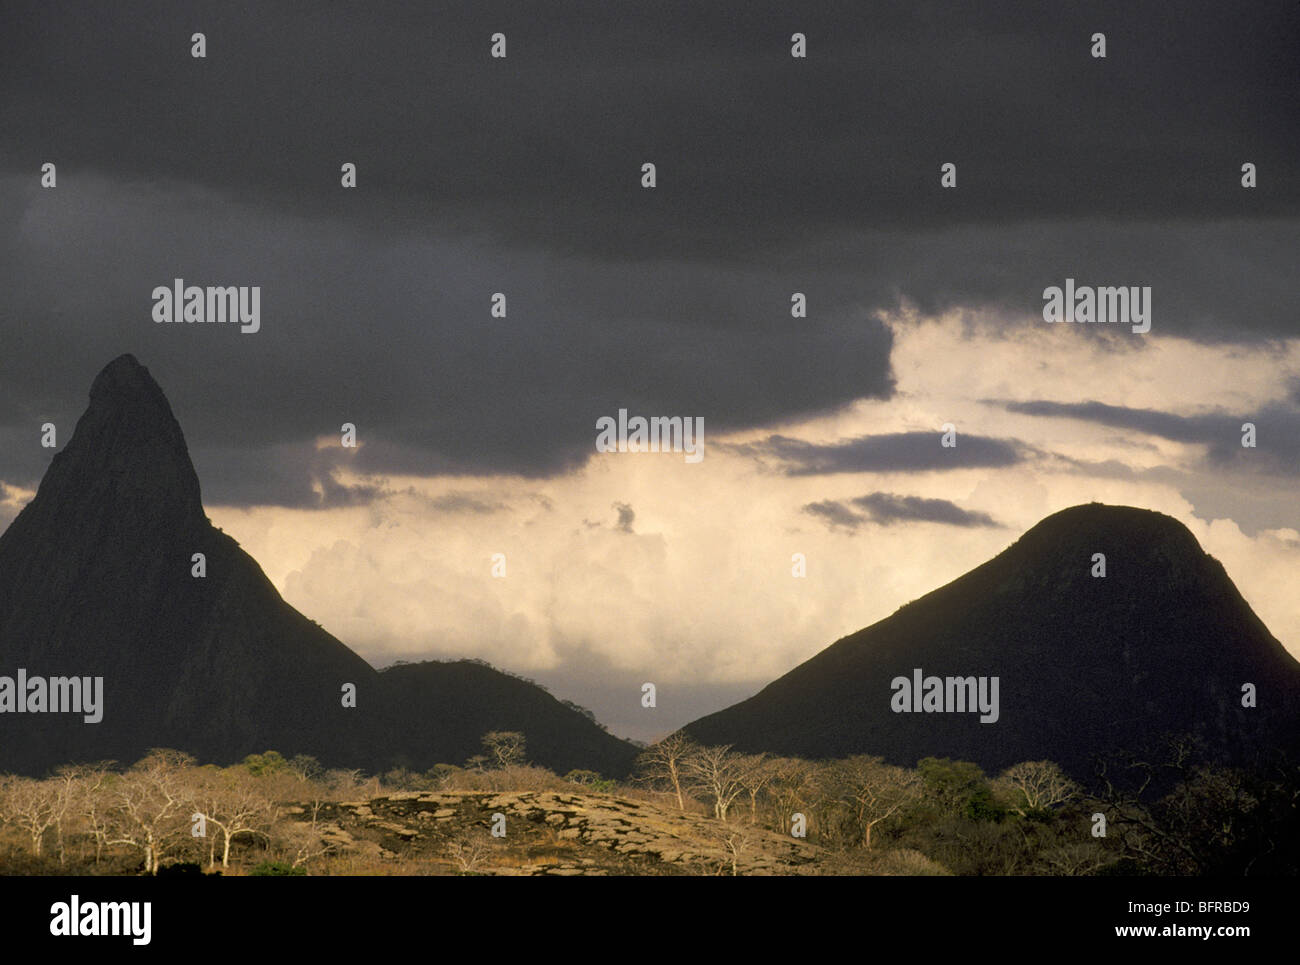 Peaks of Mount Lema range silhouetted against thick bank of white cloud Stock Photo